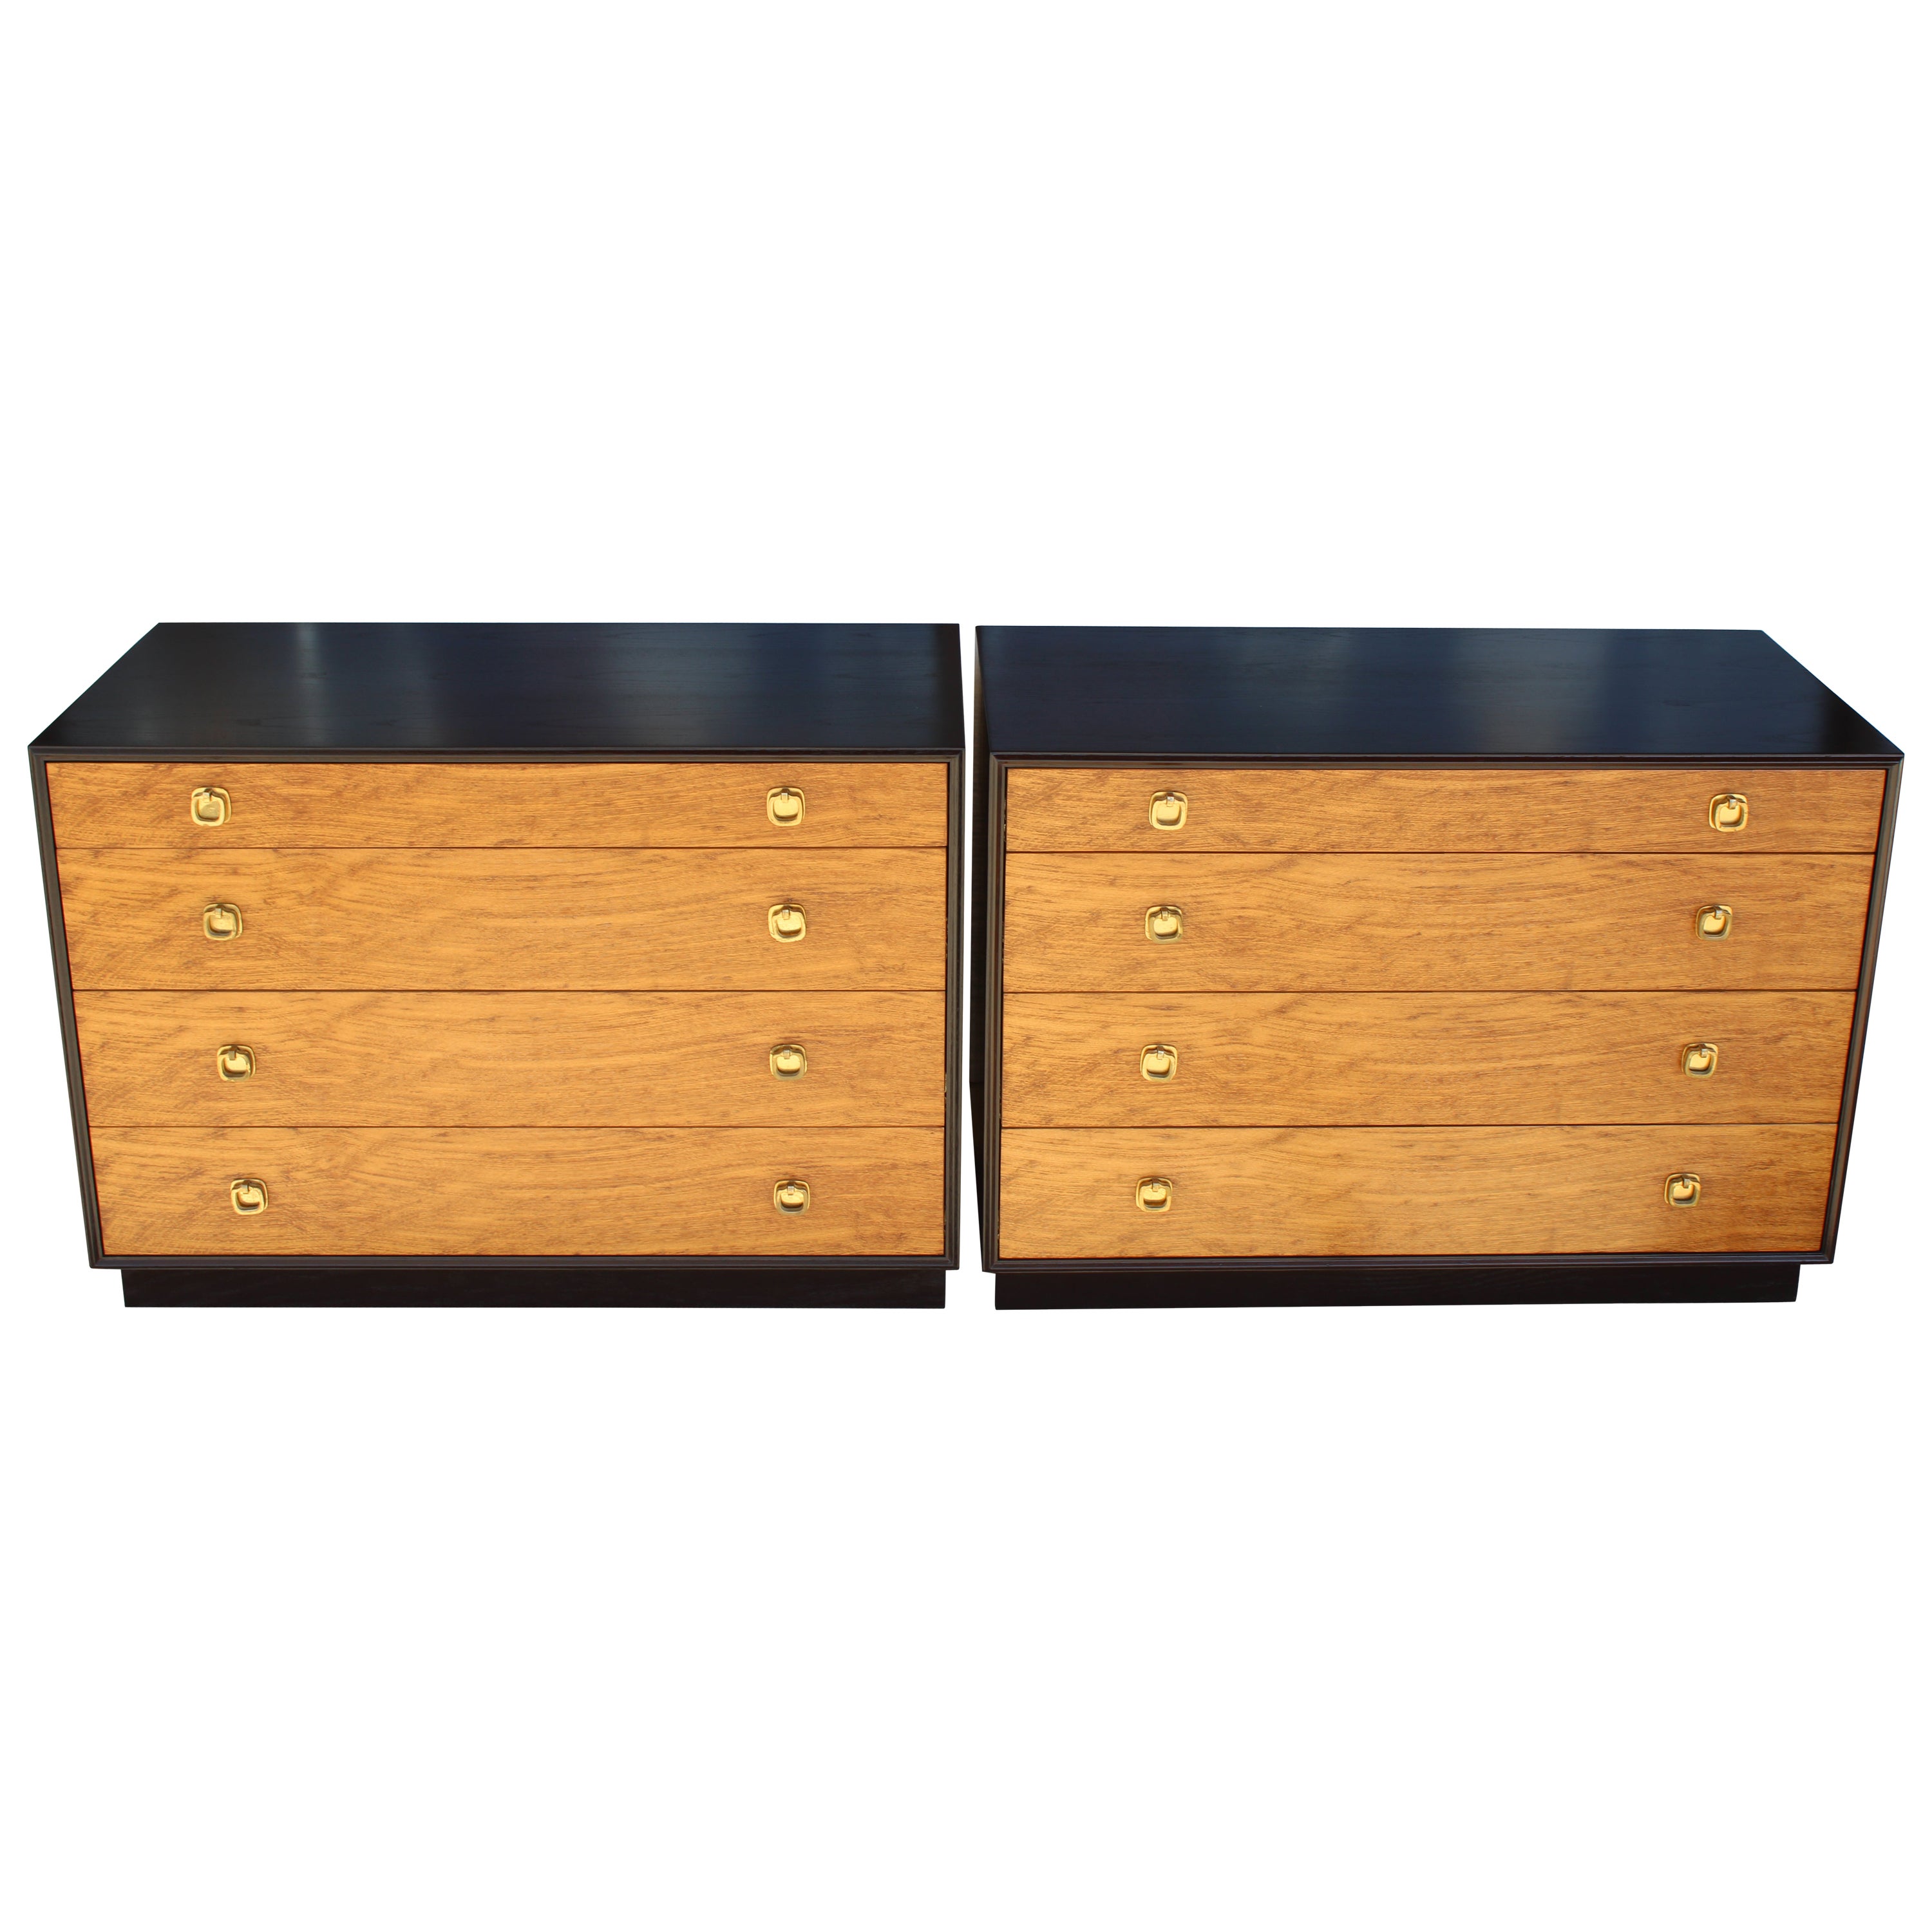 Pair of Dressers by Edward Wormley for Dunbar, Berne Indiana